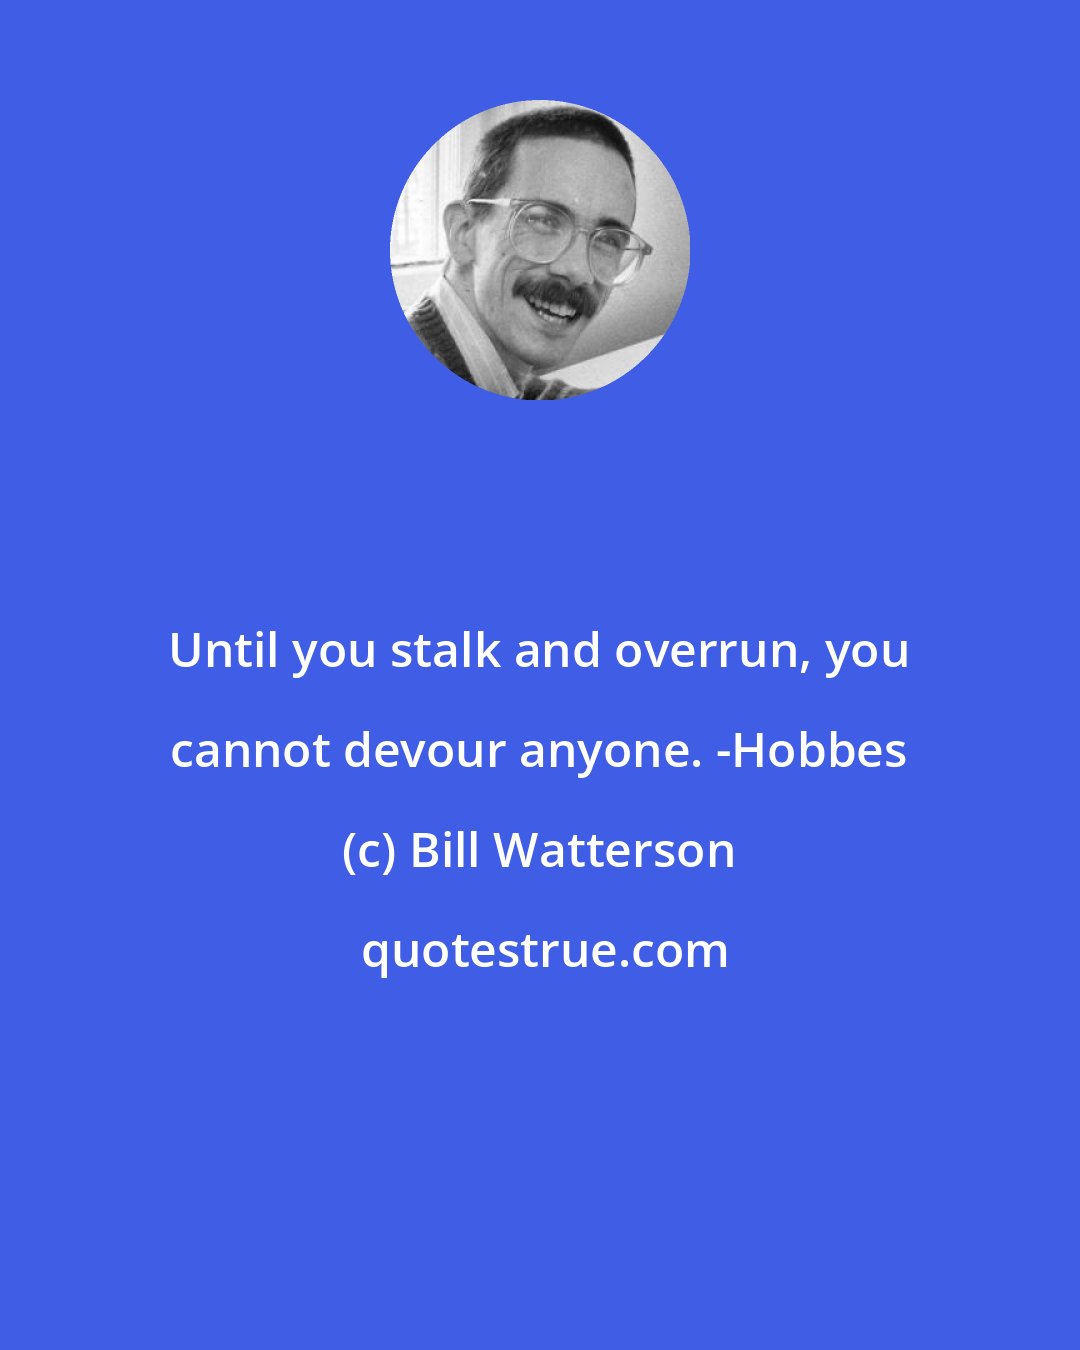 Bill Watterson: Until you stalk and overrun, you cannot devour anyone. -Hobbes